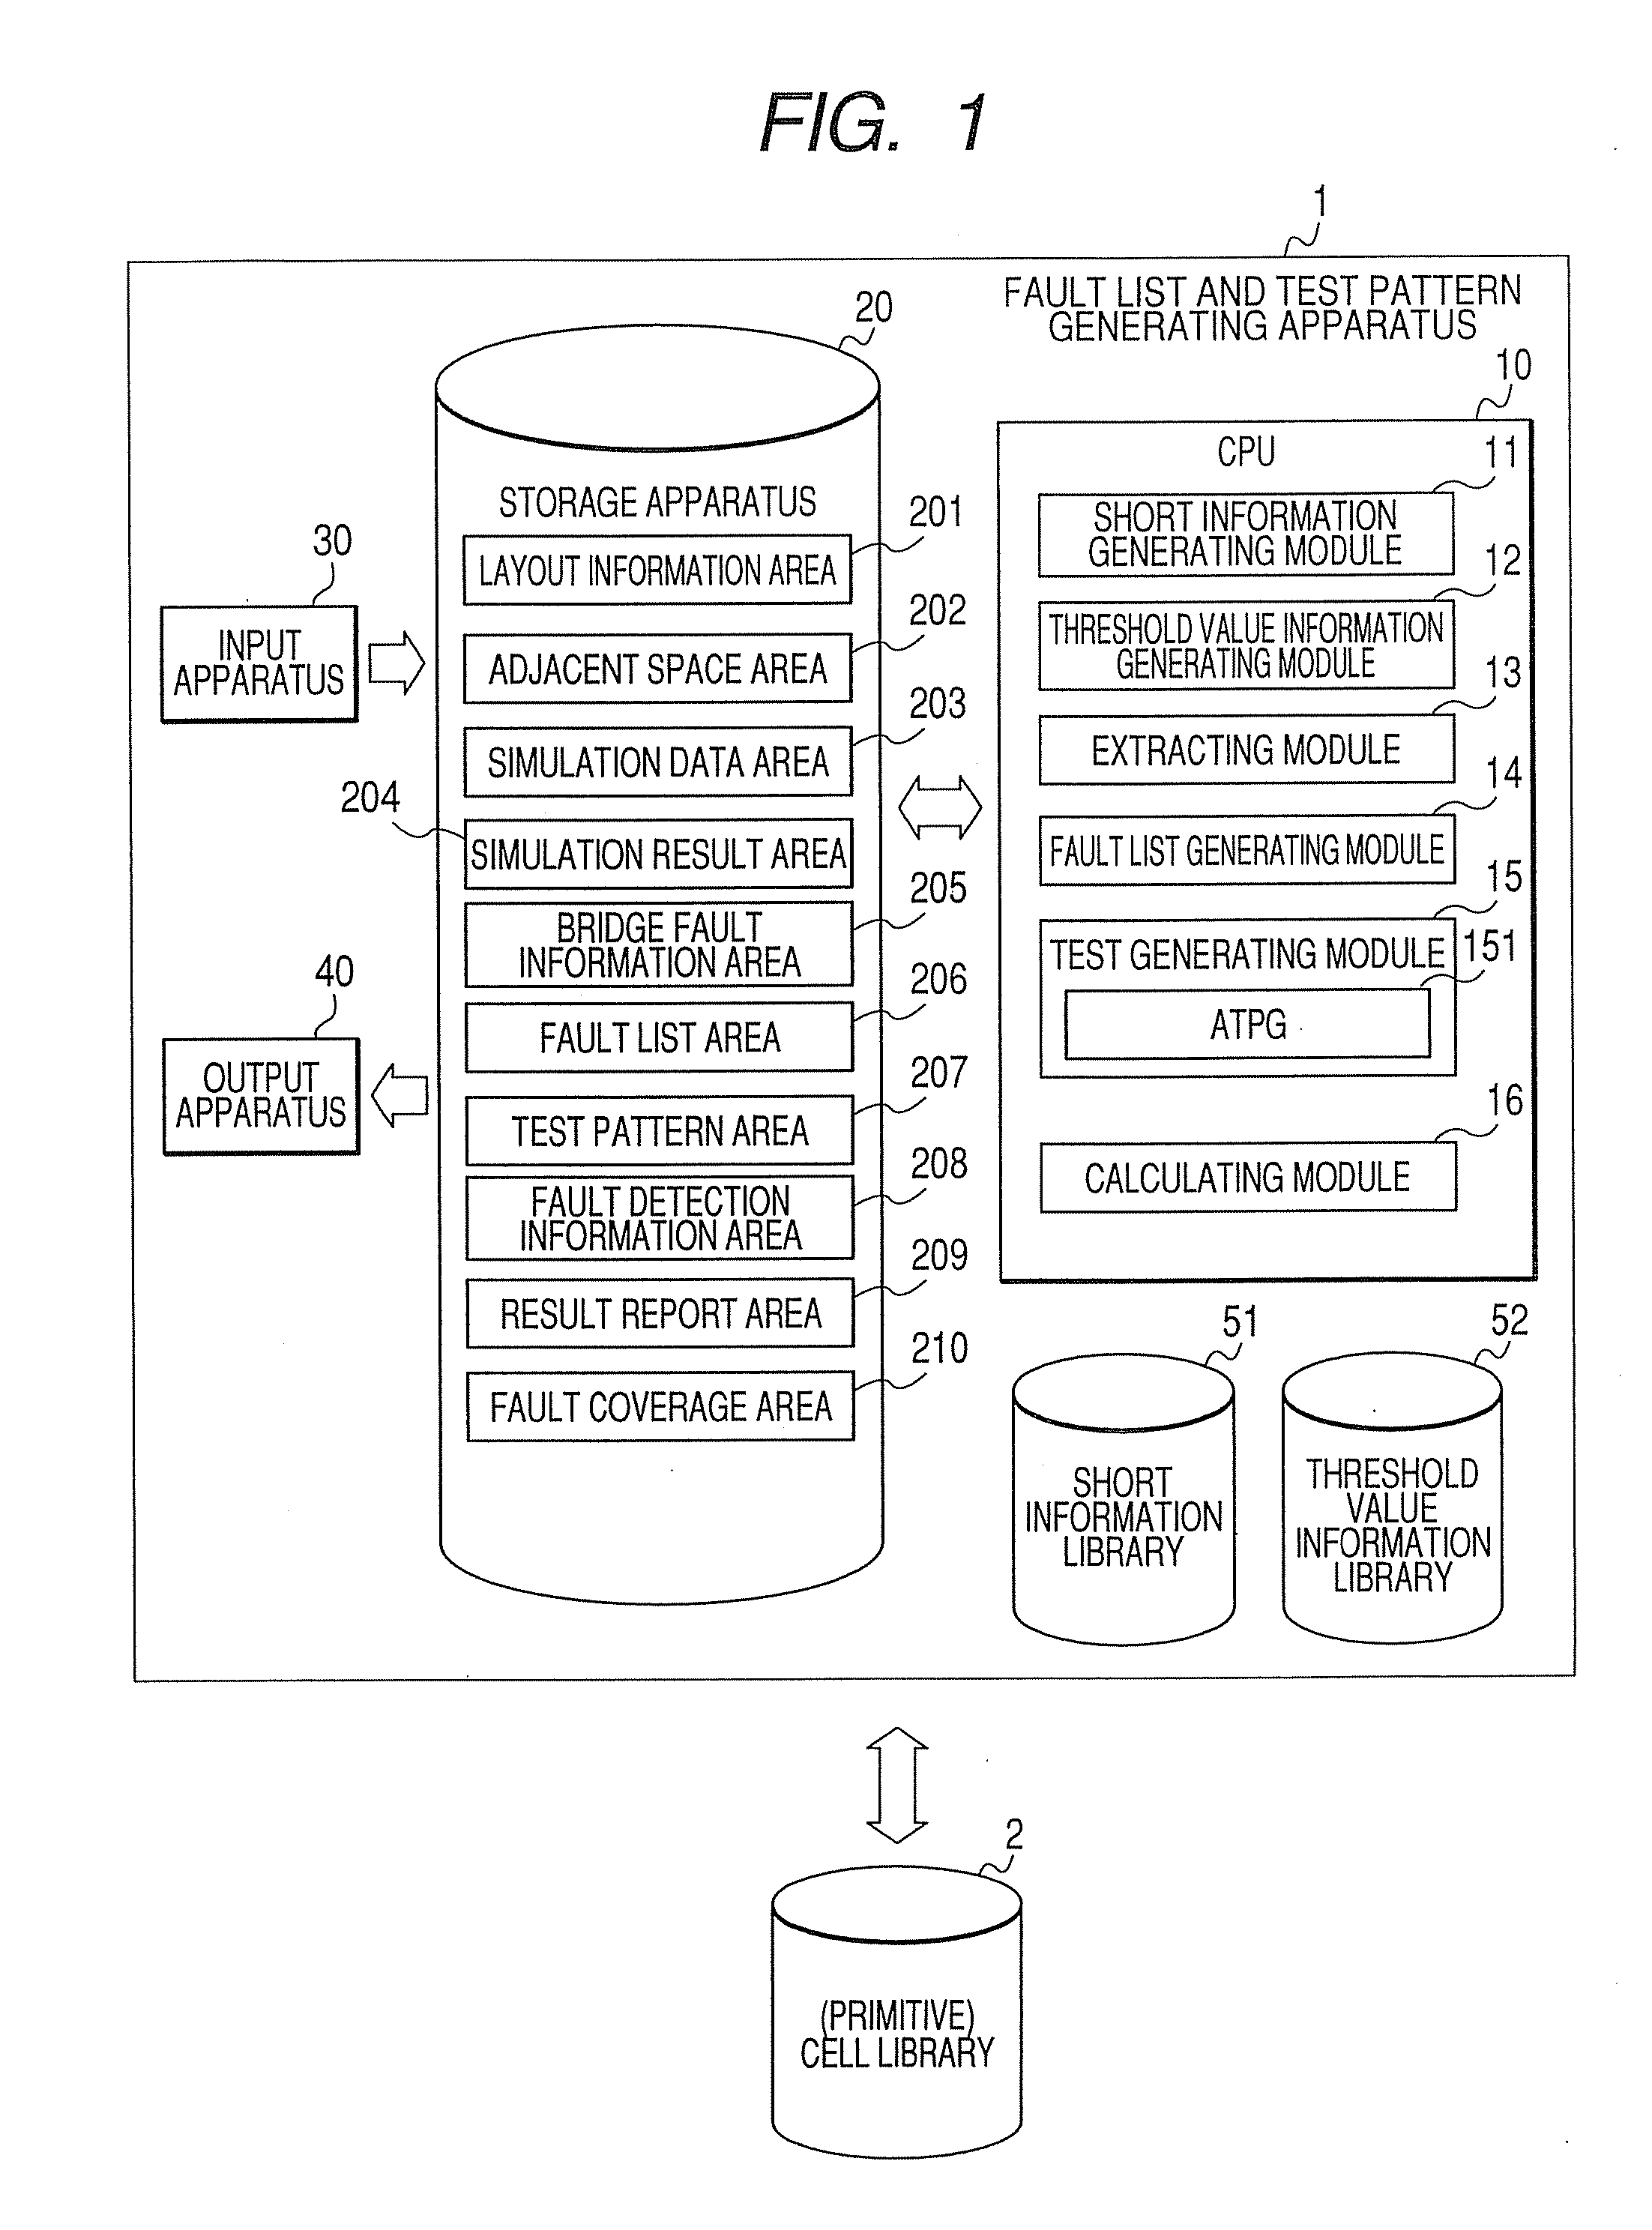 Fault list and test pattern generating apparatus and method, fault list generating and fault coverage calculating apparatus and method